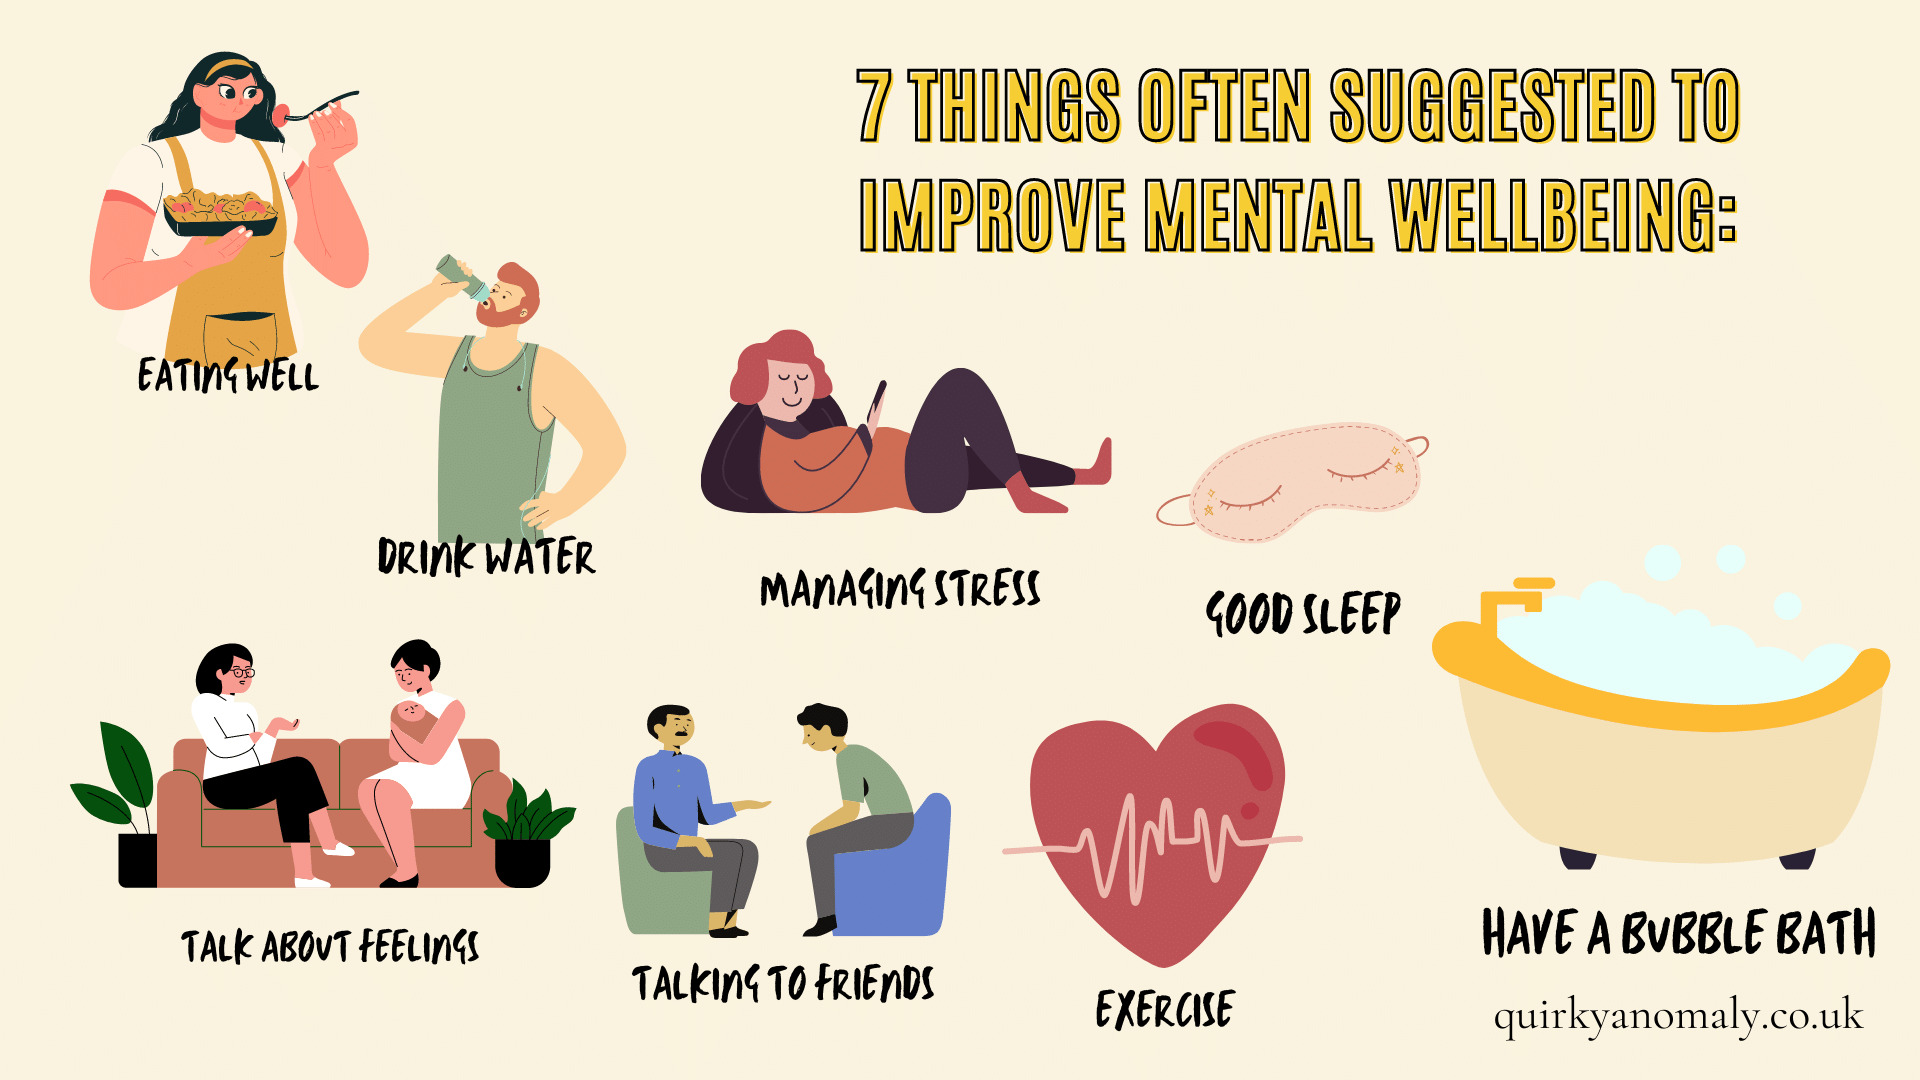 7 things often suggested to improve mental wellbeing: Eating Well, Drink Water, Manage Stress, Good Sleep, Talk about Feelings, Socialise with friends and exercise